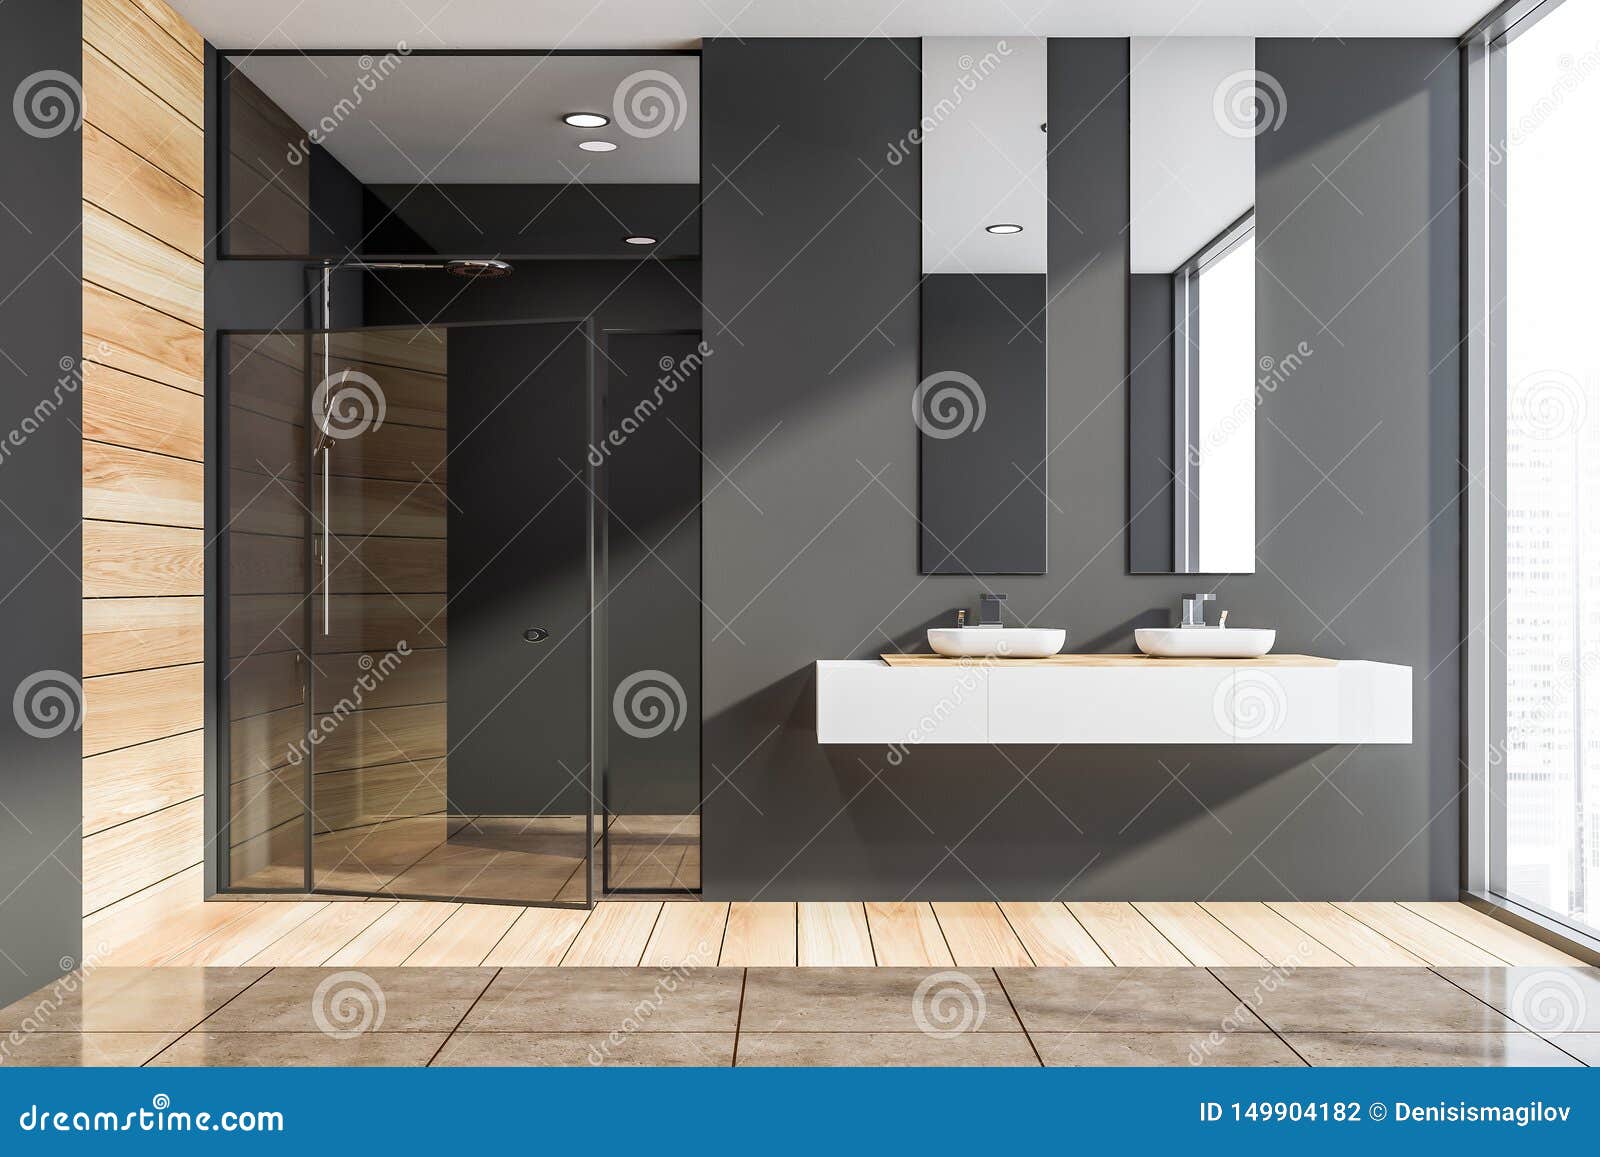 Dark Gray And Wooden Bathroom Sinks And Shower Stock Illustration Illustration Of Large House 149904182